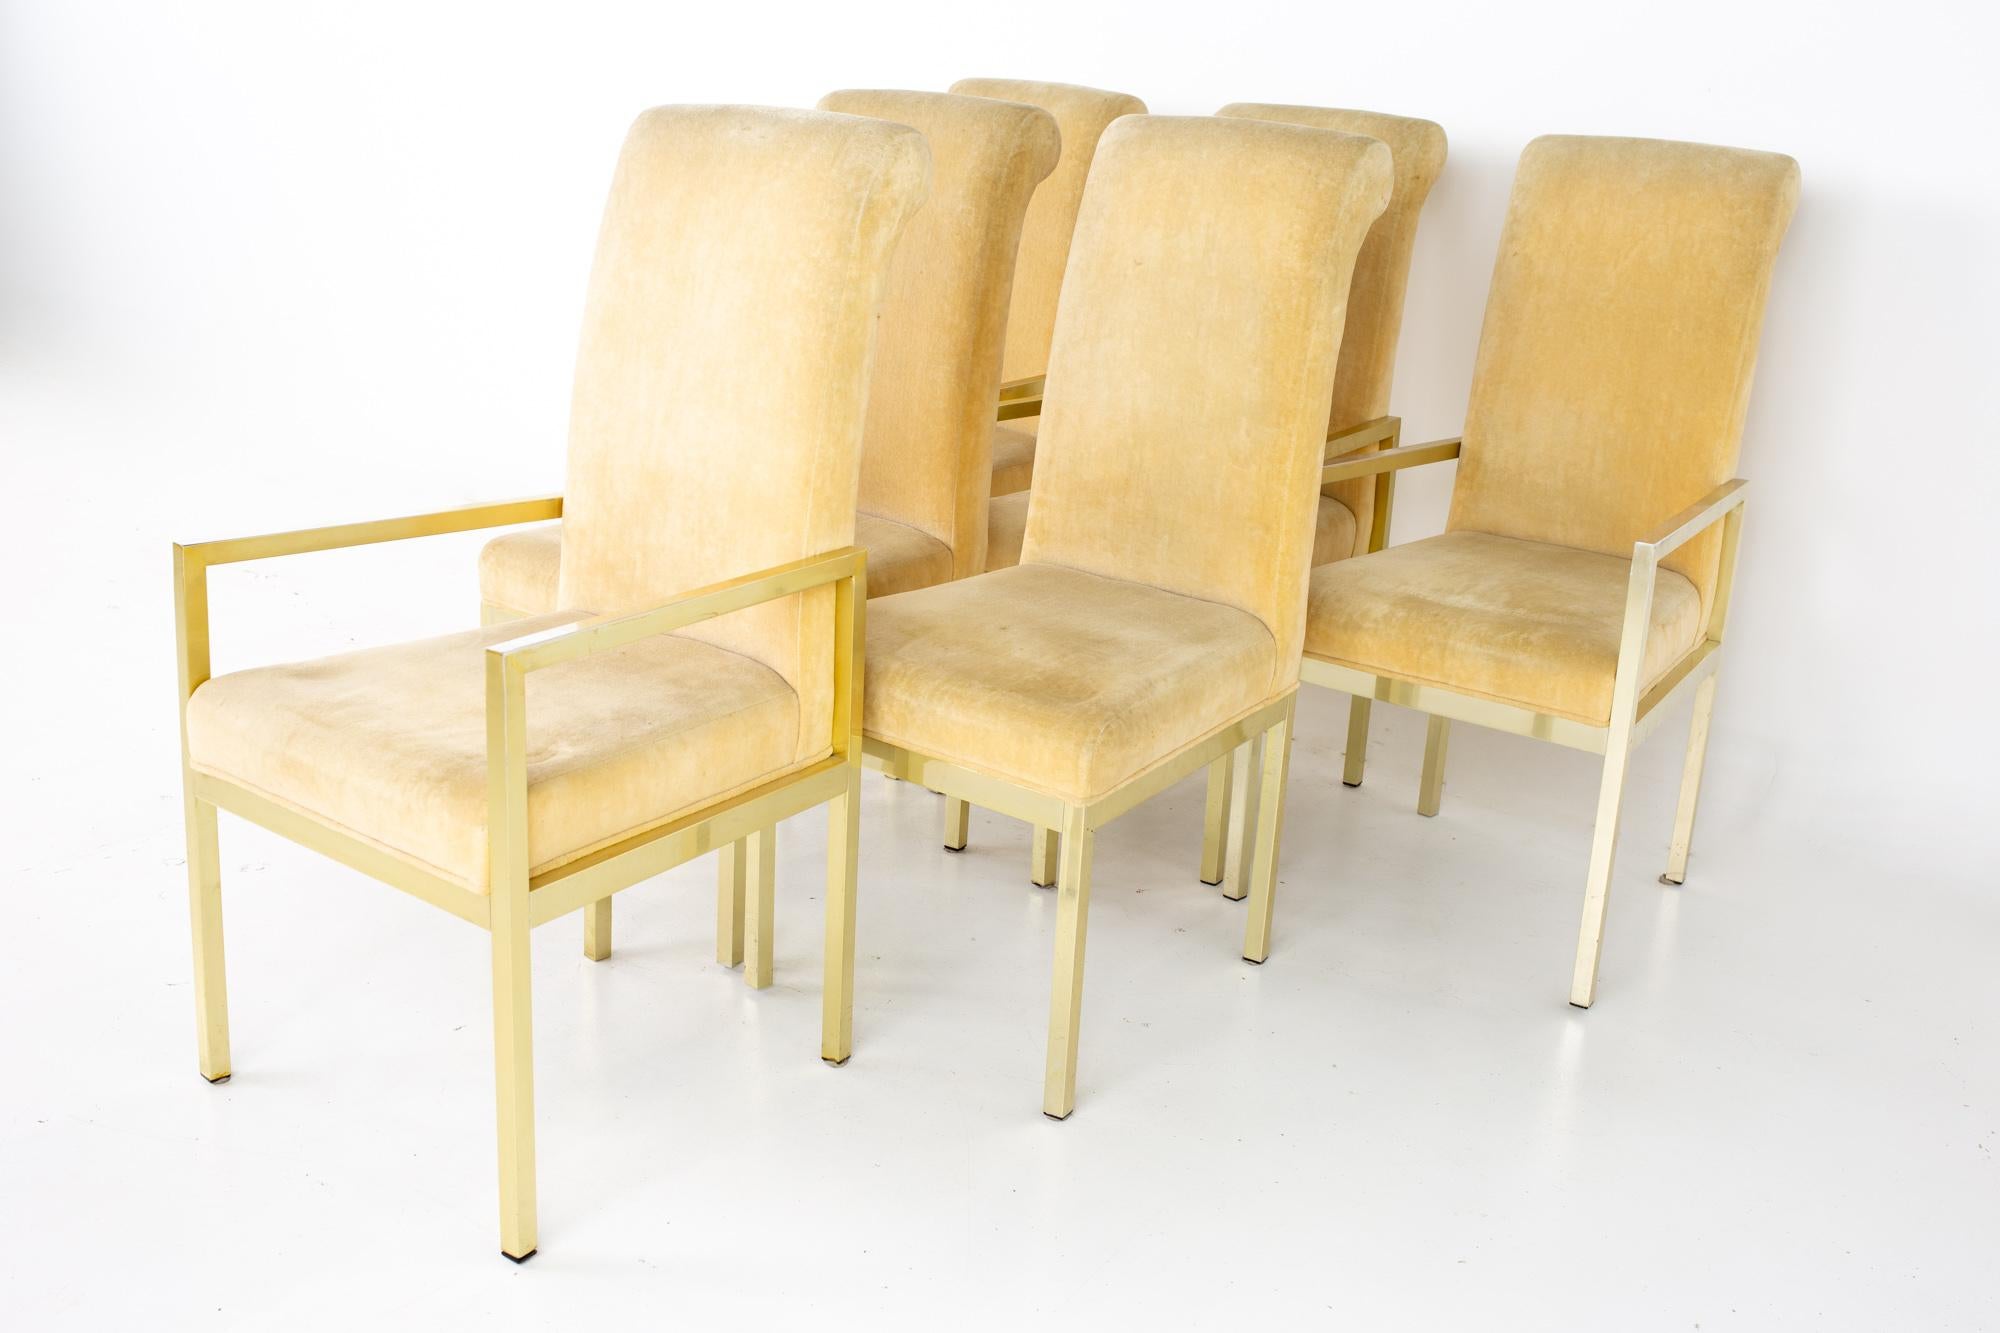 Design Institute of America mid century brass dining chairs - set of 6
Each chair measures: 21.5 wide x 21.5 deep x 42 high, with a seat height of 18 inches

All pieces of furniture can be had in what we call restored vintage condition. That means